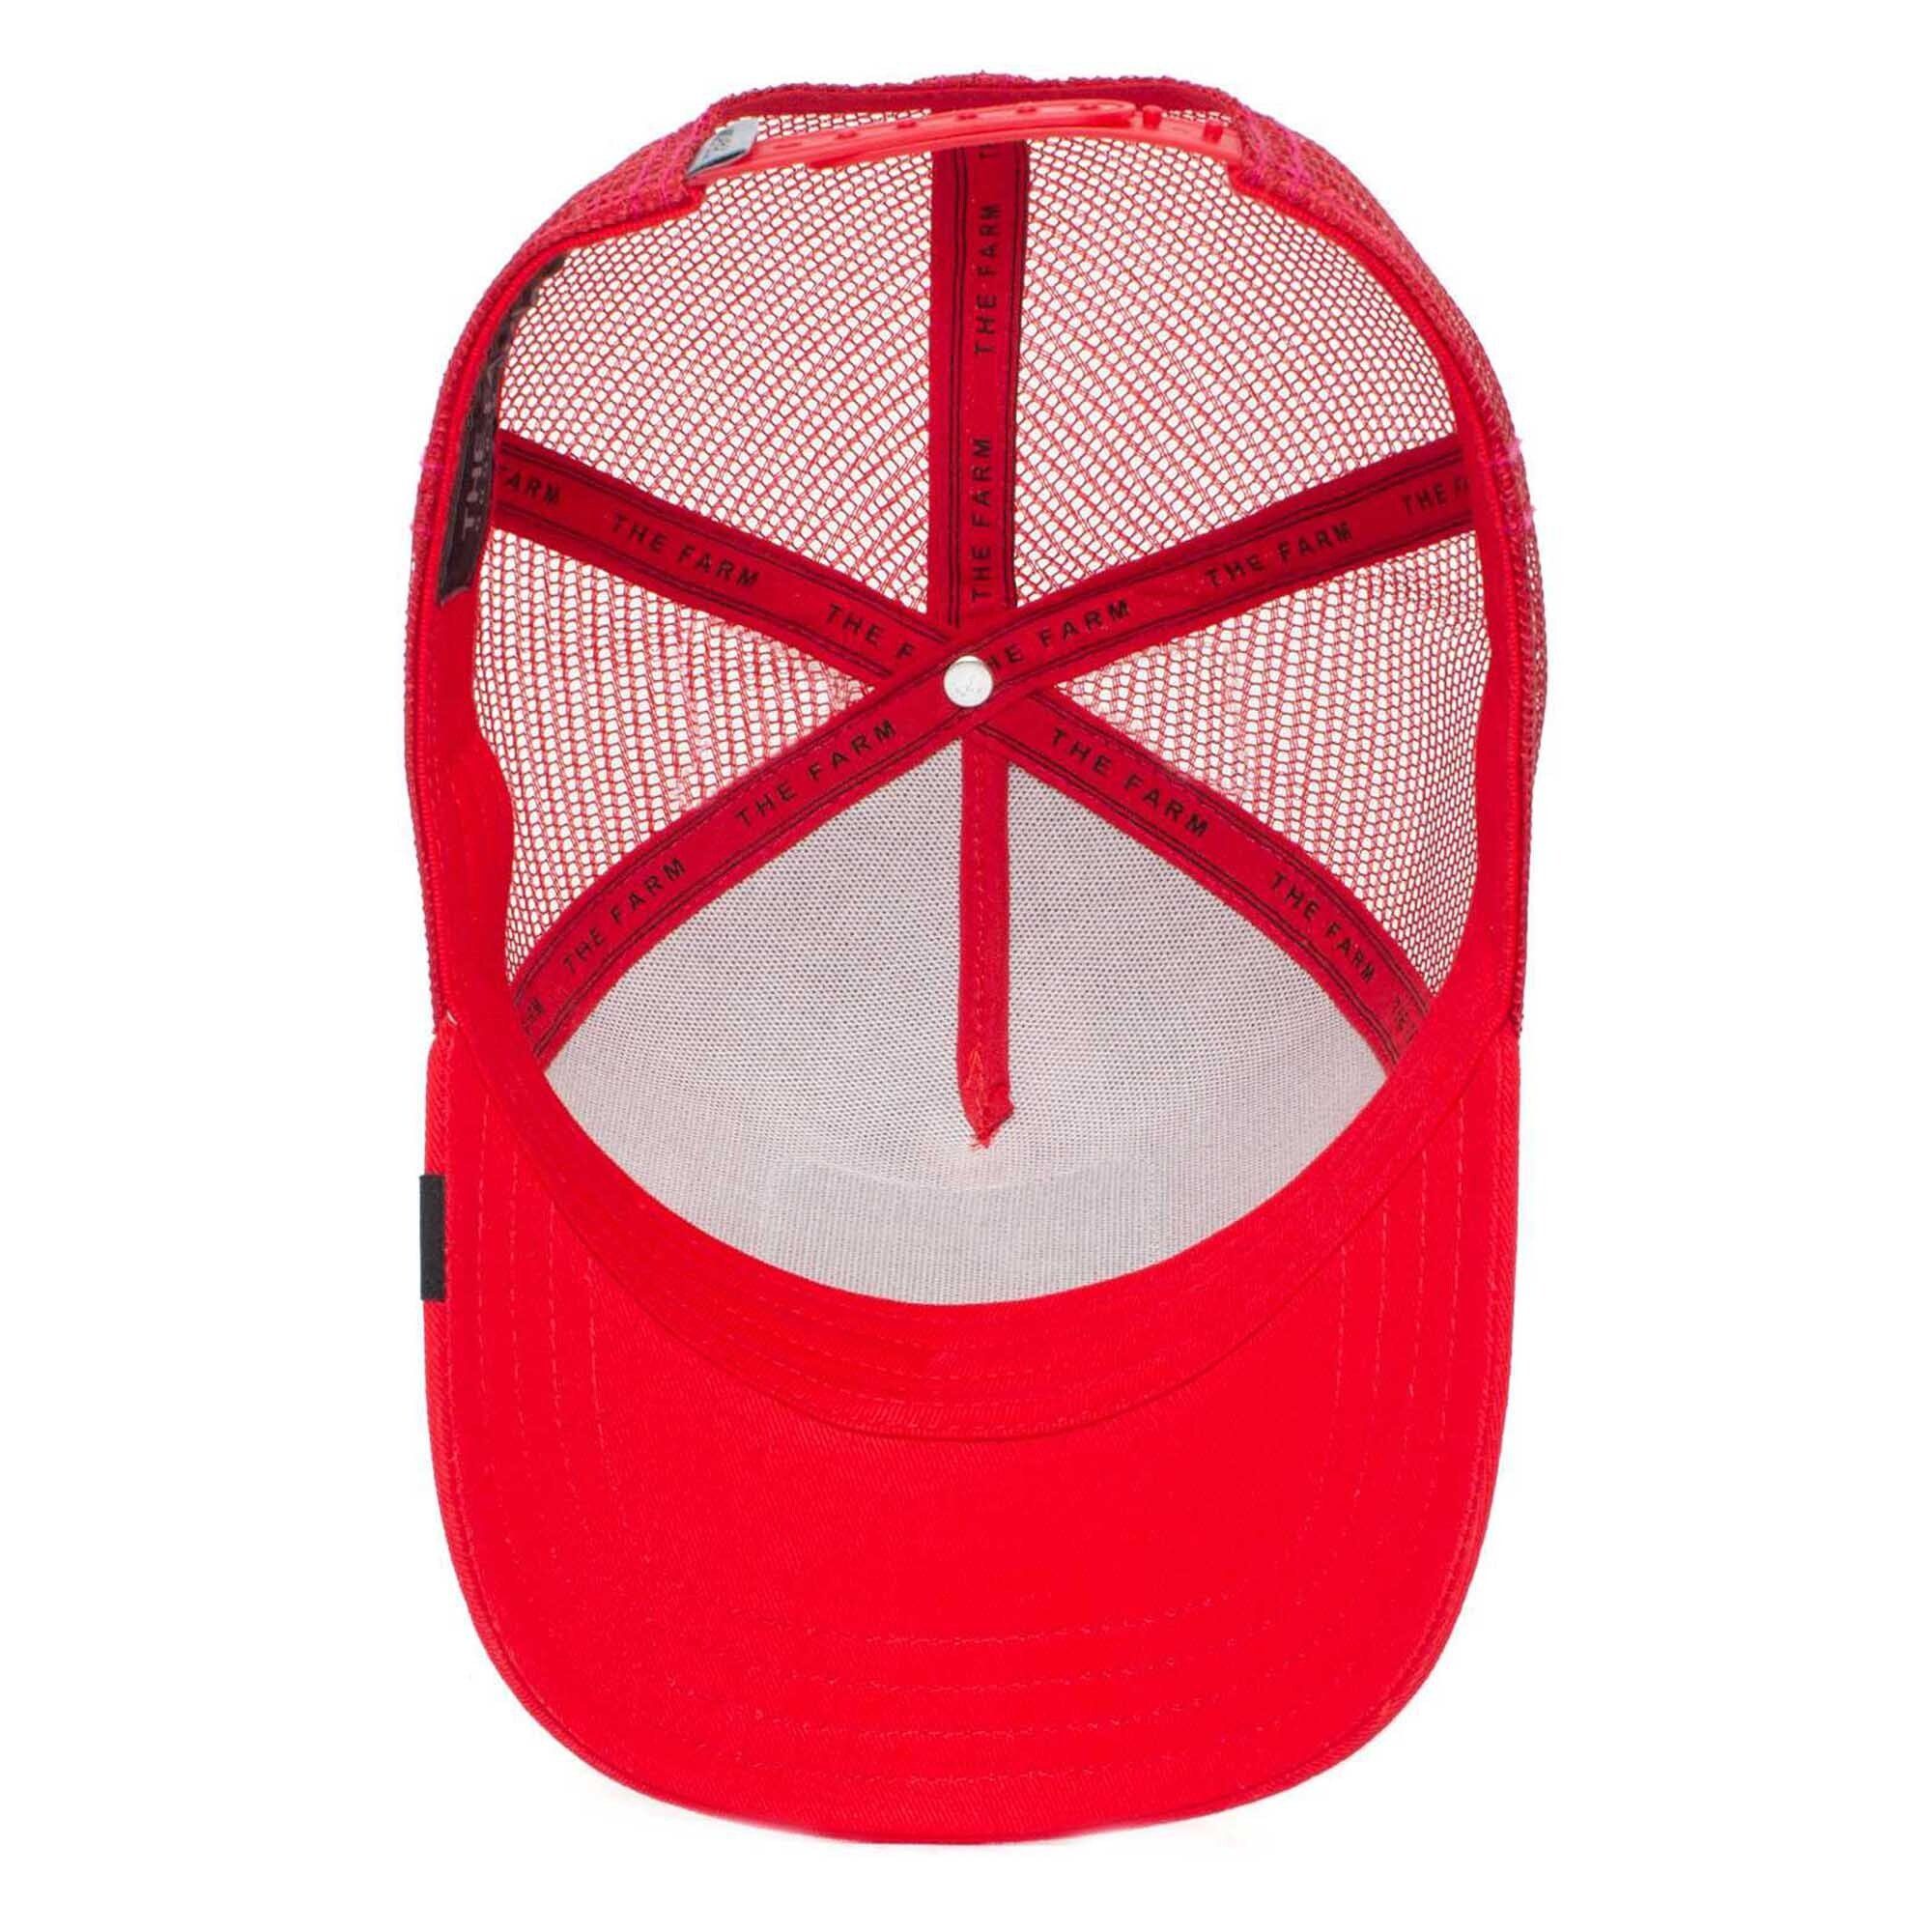 Baseball Cap GOORIN Trucker Bros. Cock Unisex Size - Cap One red Kappe, Frontpatch, The